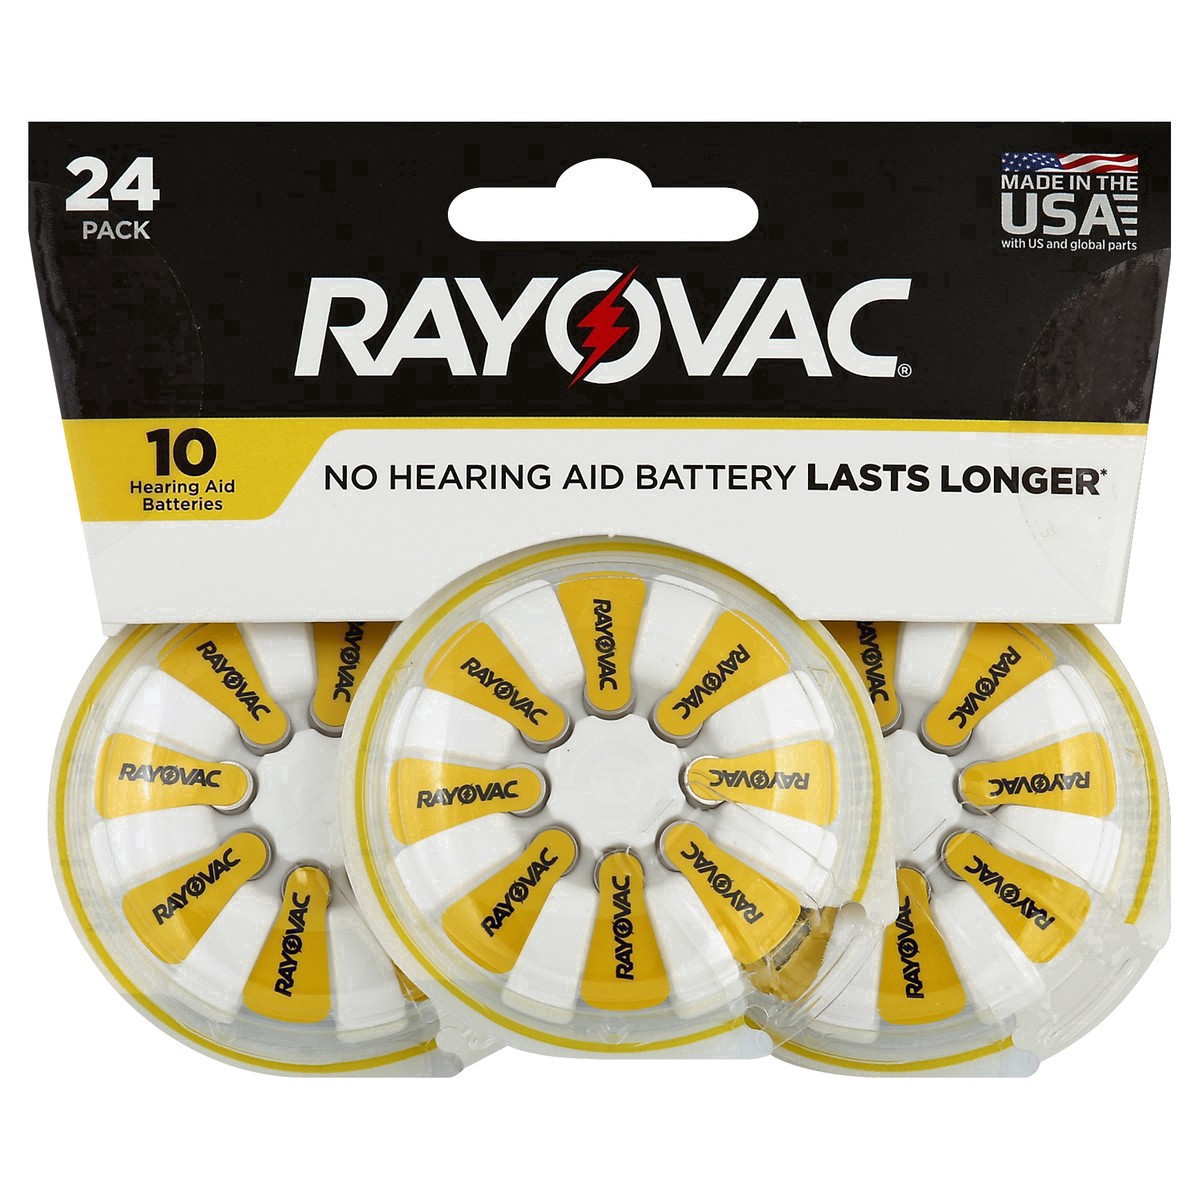 slide 37 of 37, Rayovac Size 10 Hearing Aid Batteries (24 Pack), 24 ct